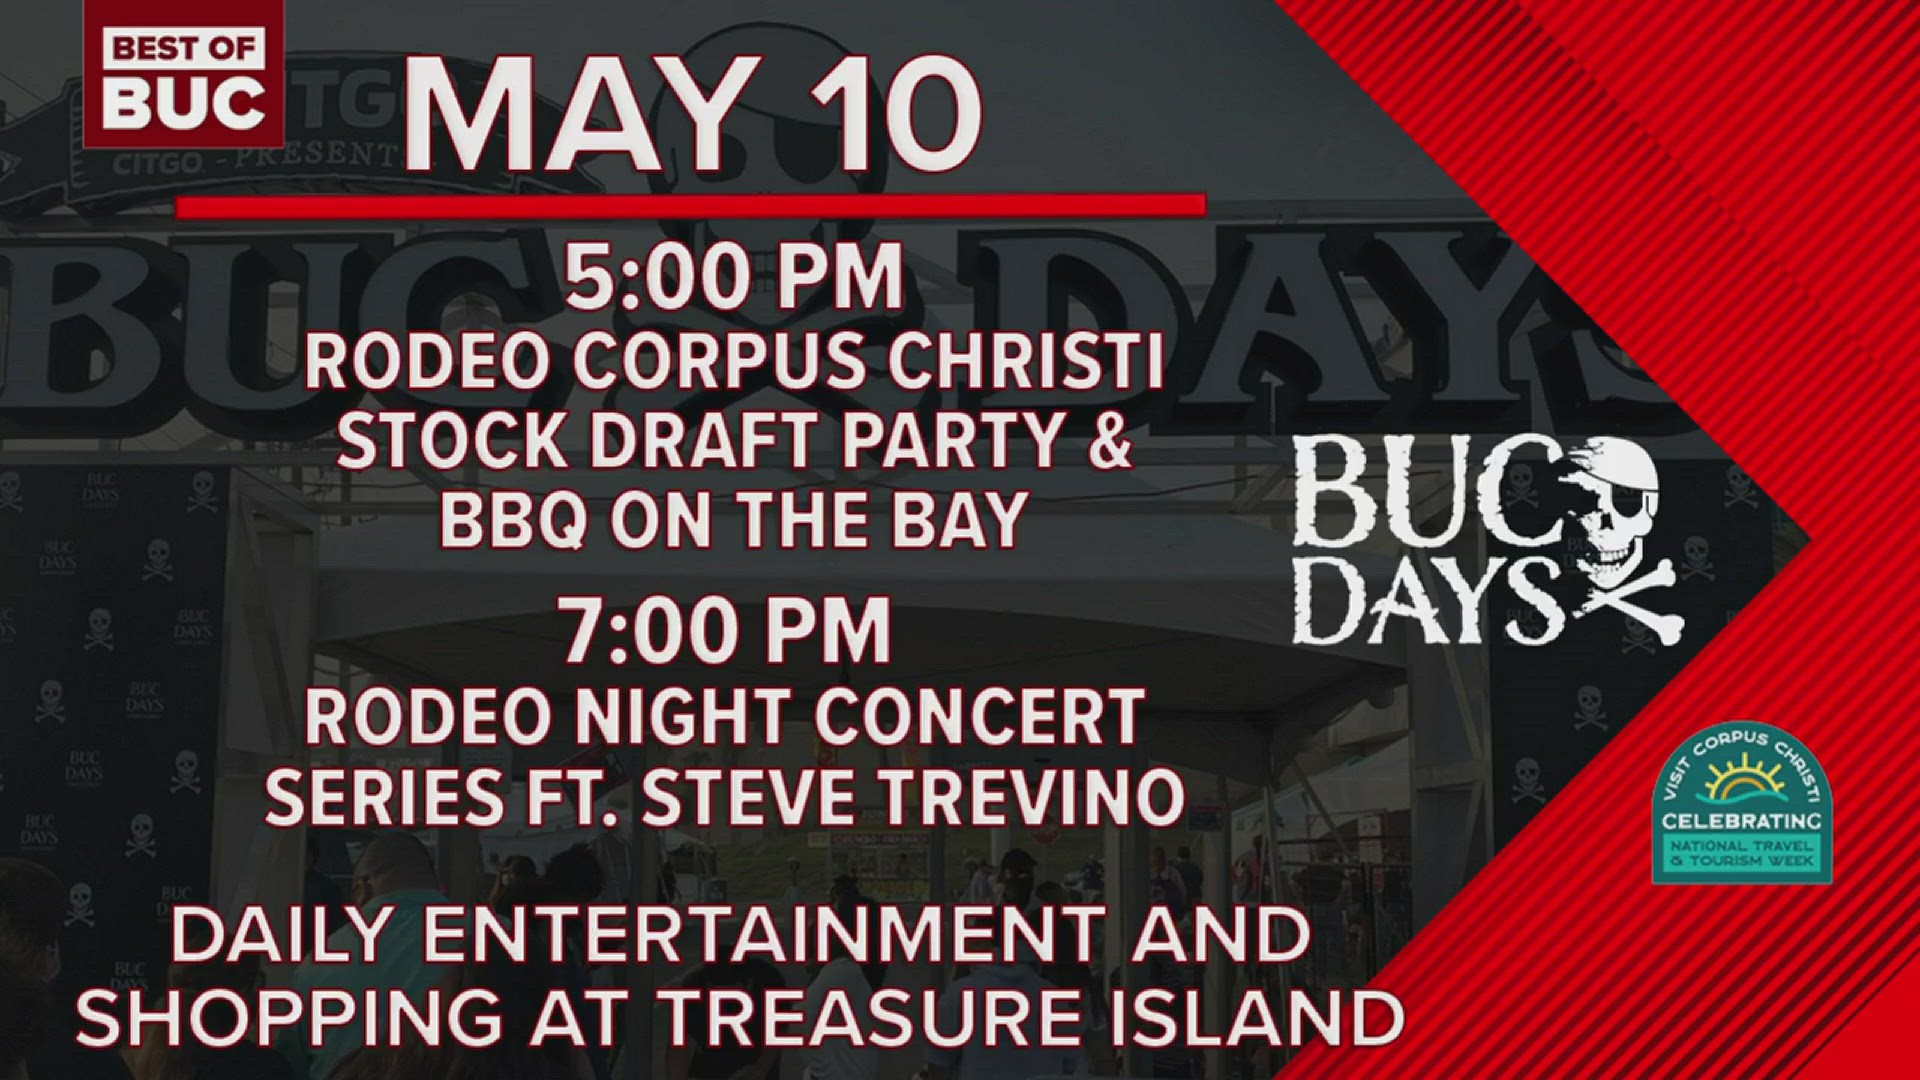 You can enjoy the carnival and then catch Rodeo Corpus Christi followed by Steve Trevino at the American Bank Center!